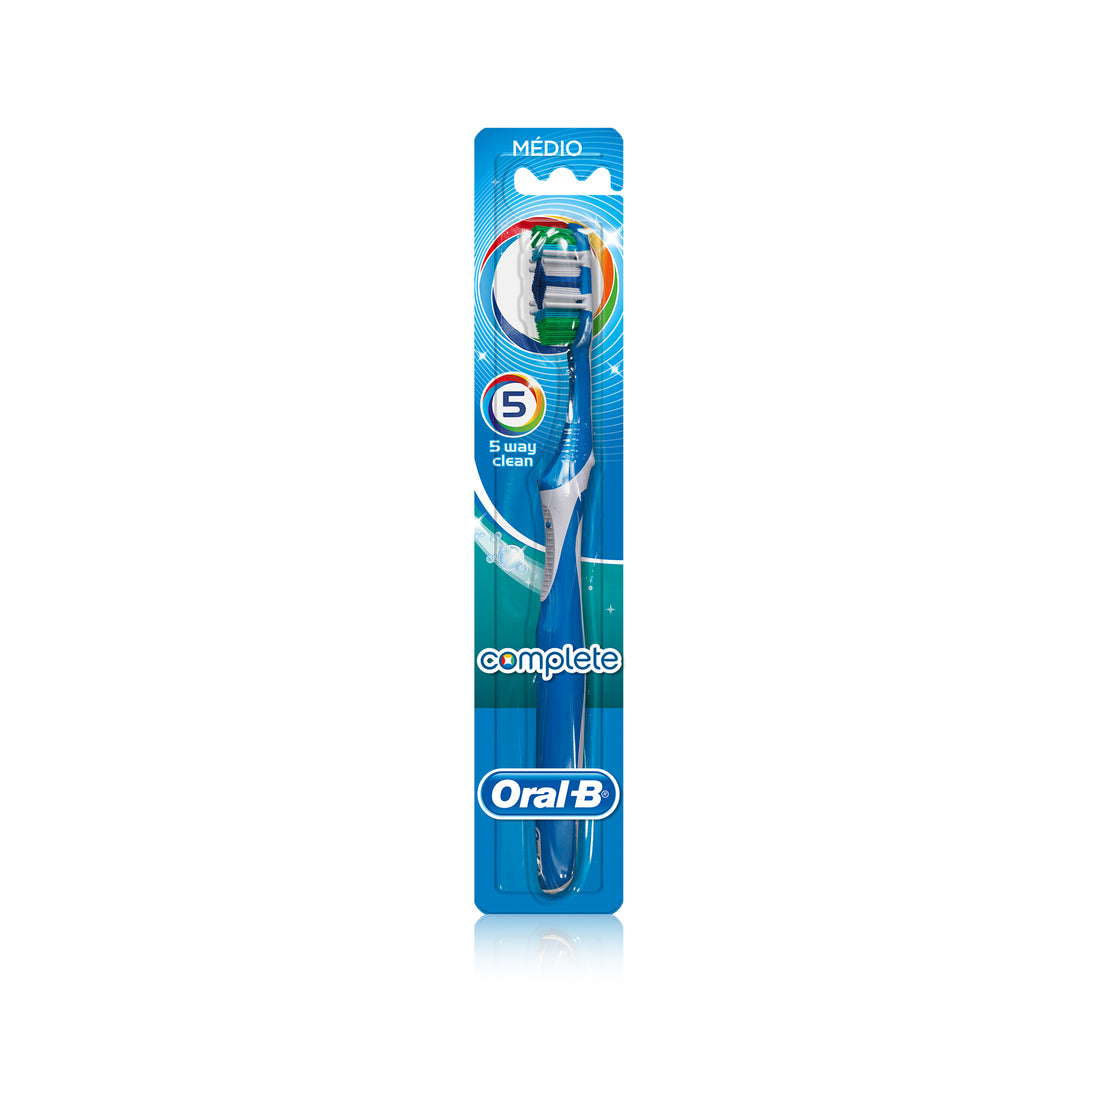 Oral-B Complete Toothbrush 5Way Clean 1 Un